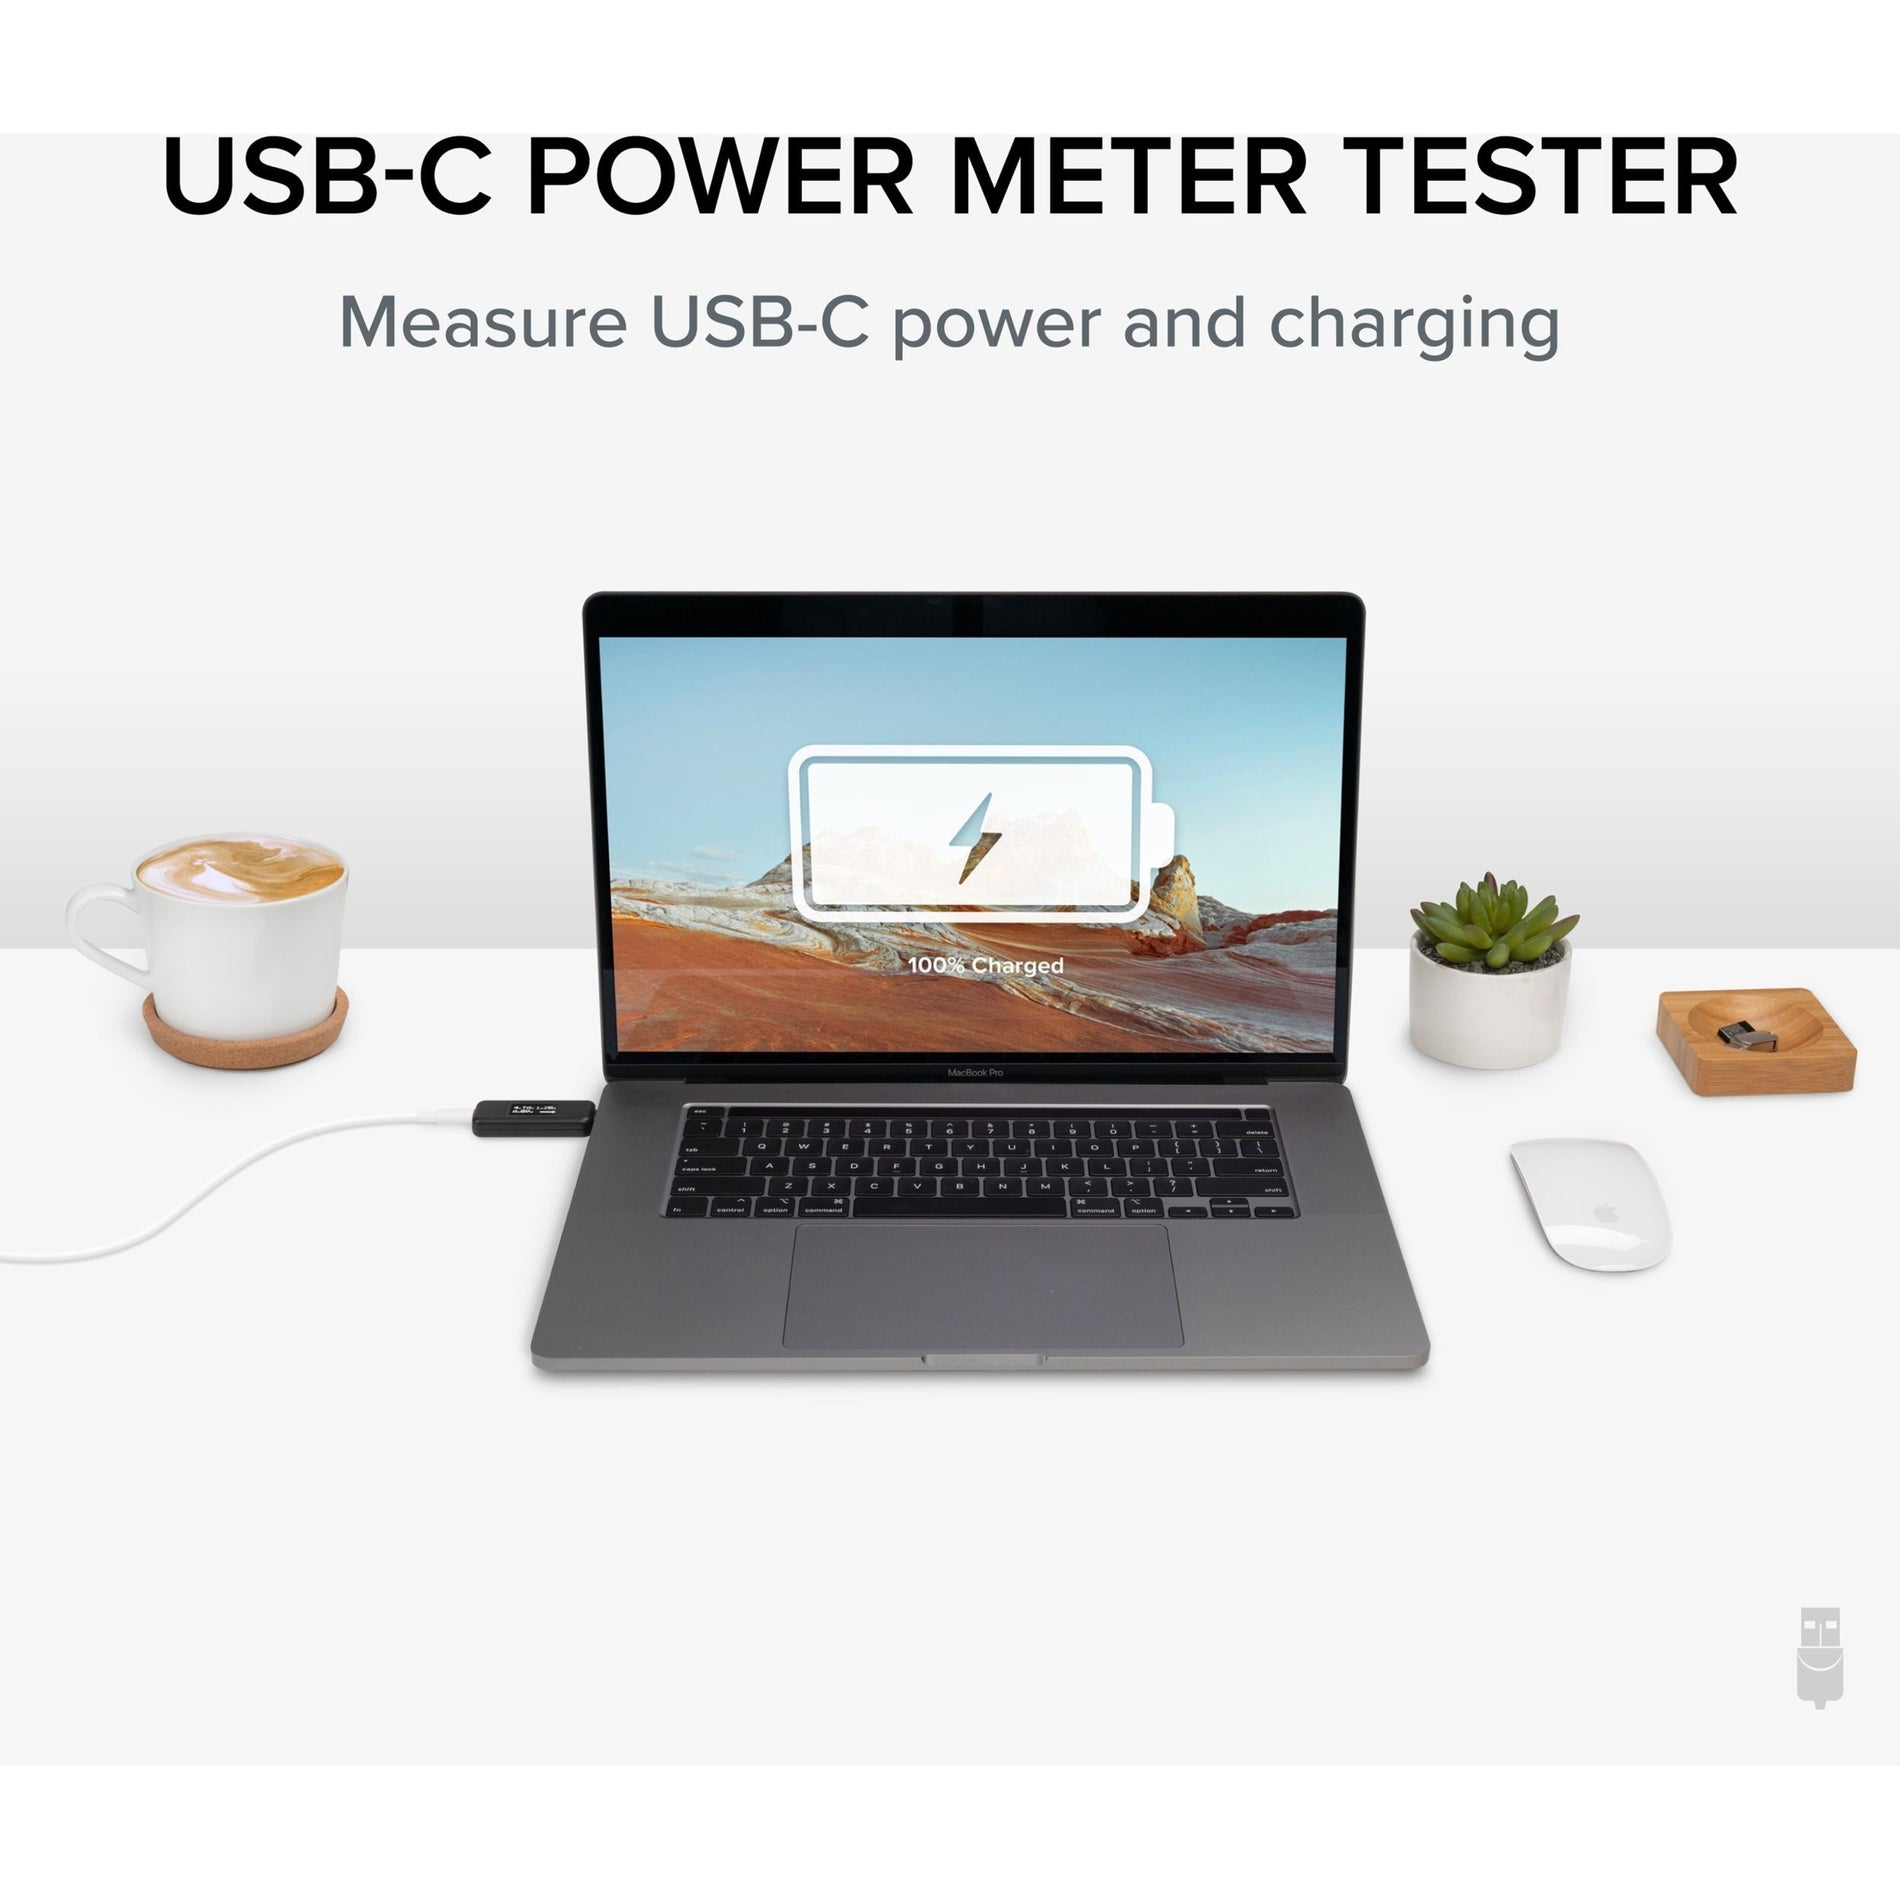 Plugable USBC-VAMETER USB-C Voltage and Amperage Meter, OLED Screen with Current Flow Detect